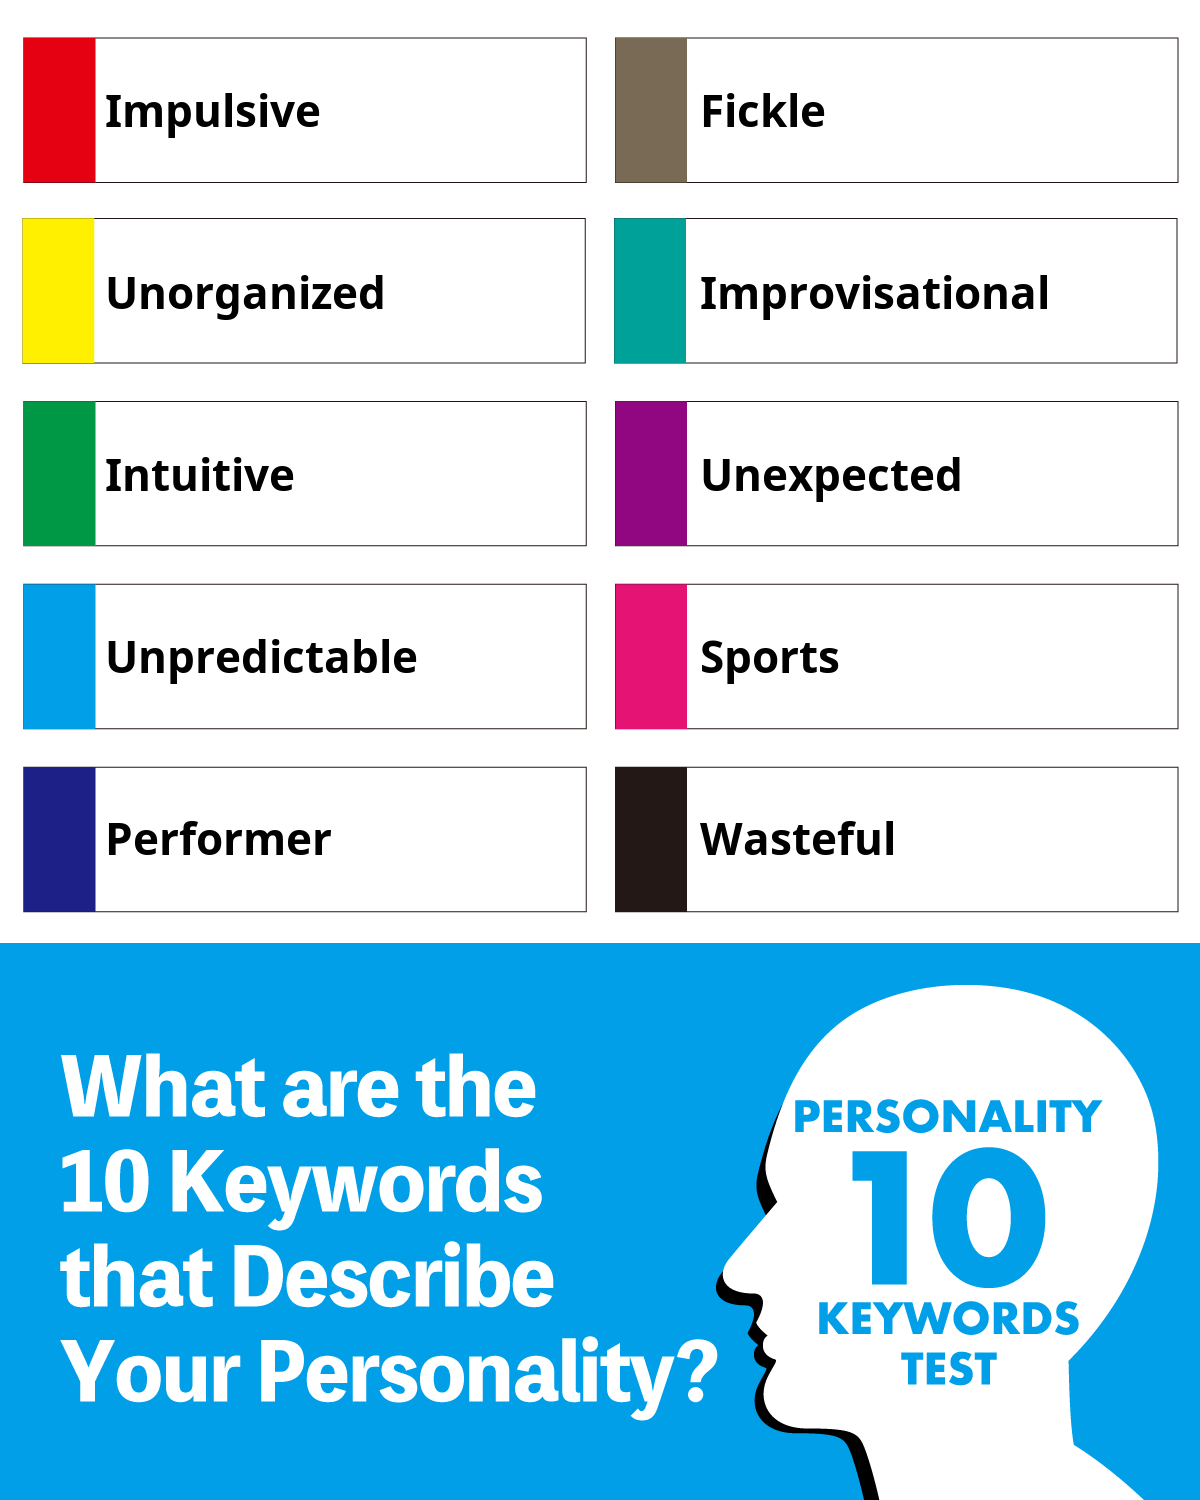 10 Personality Keywords Test | What are the 10 Keywords that Describe Your Personality?